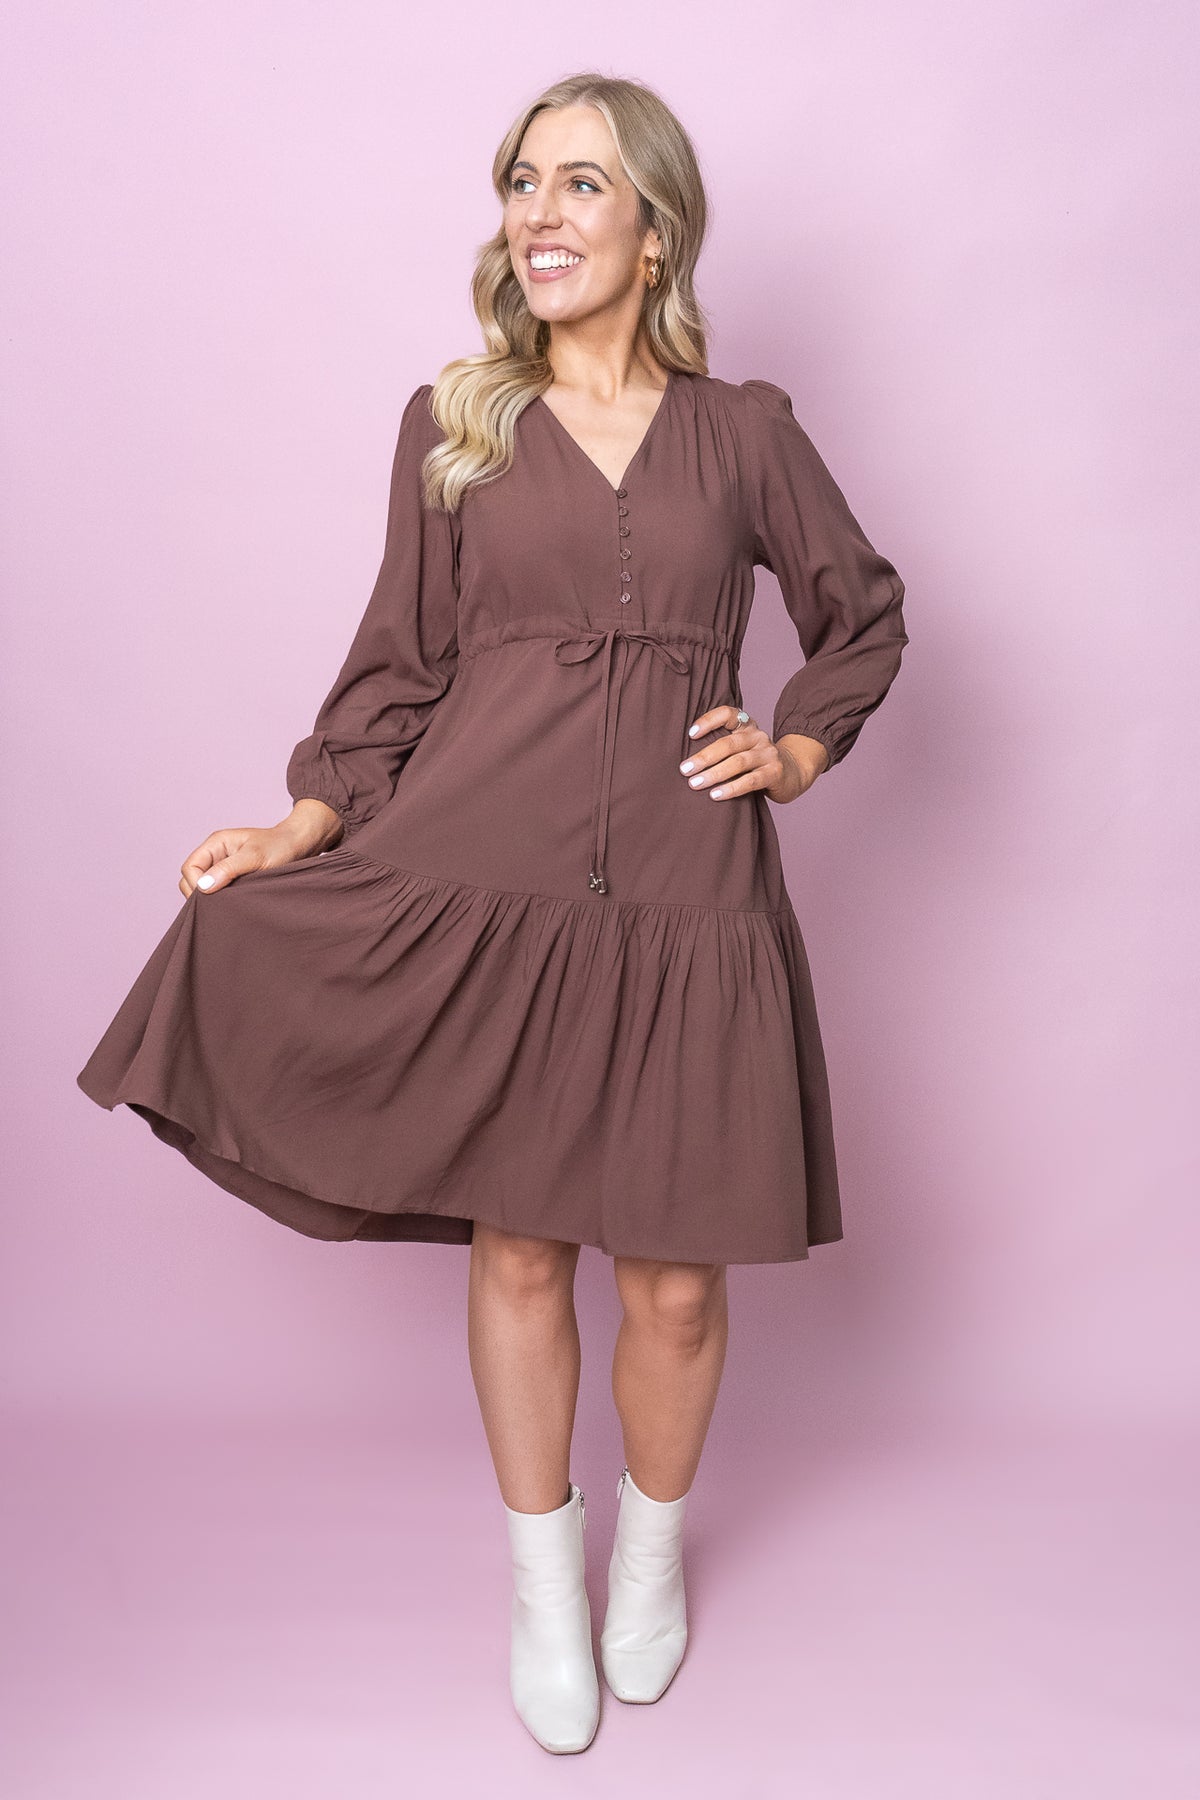 Dixie Dress in Chocolate